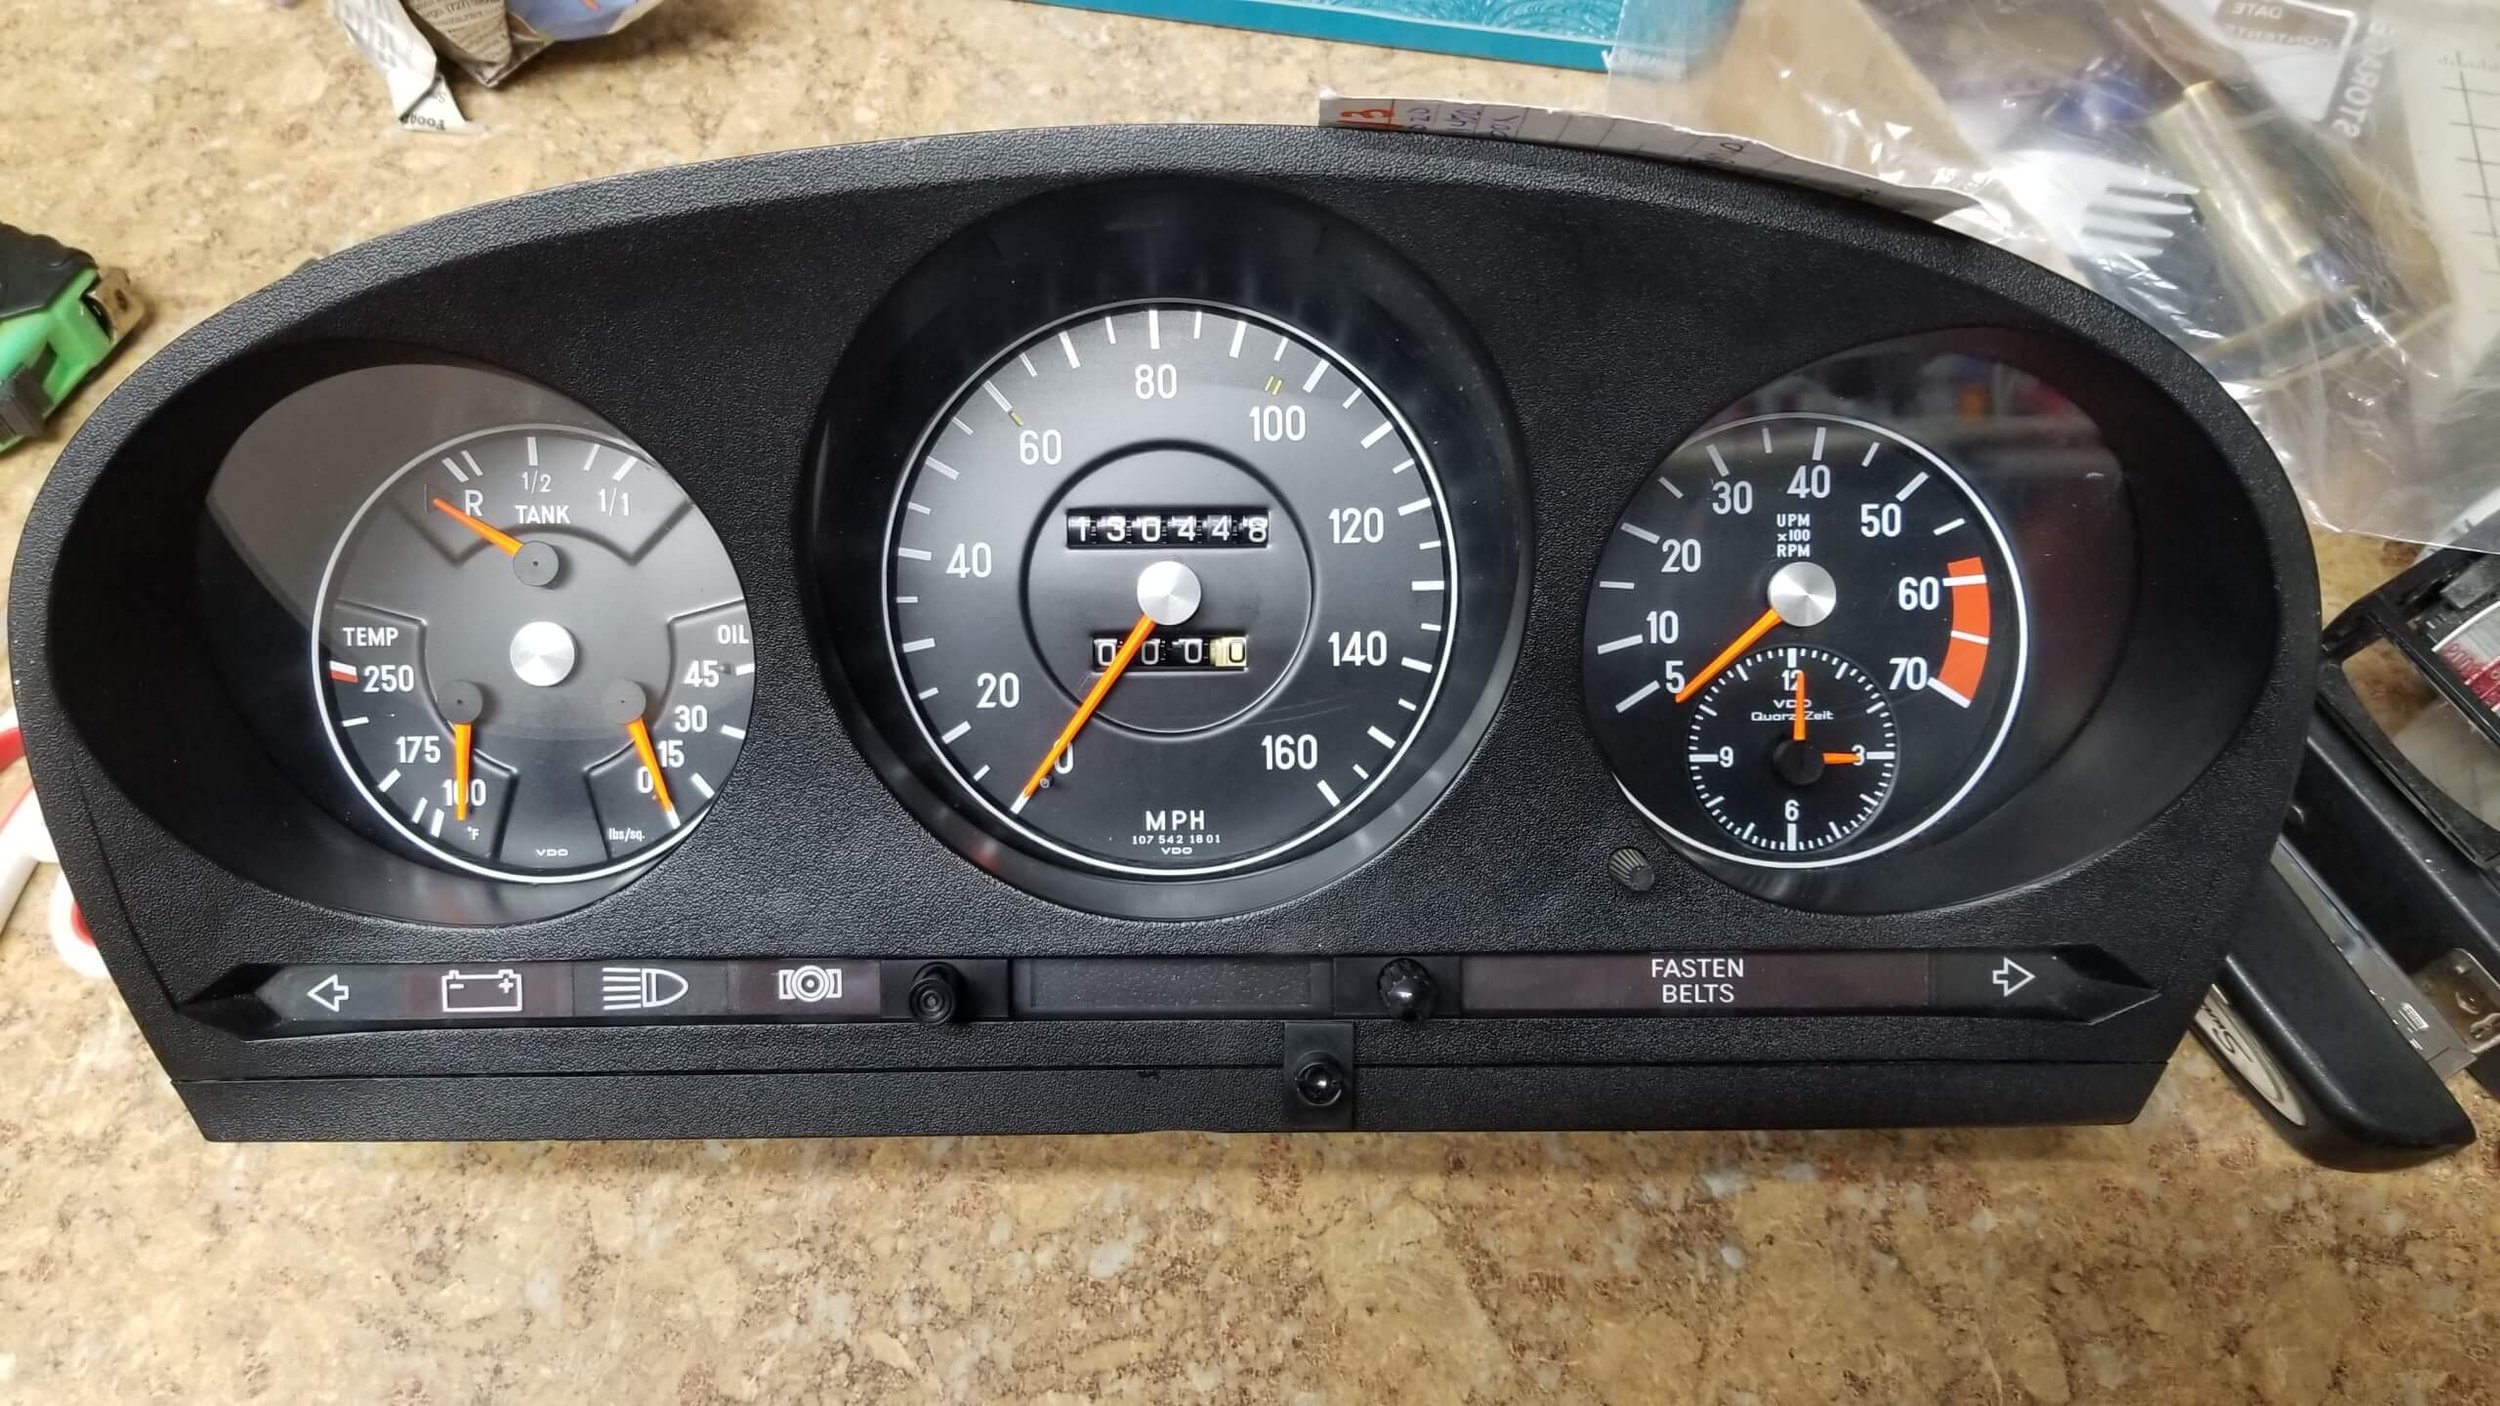 Mercedes needles painted, odometer inoperable and clock